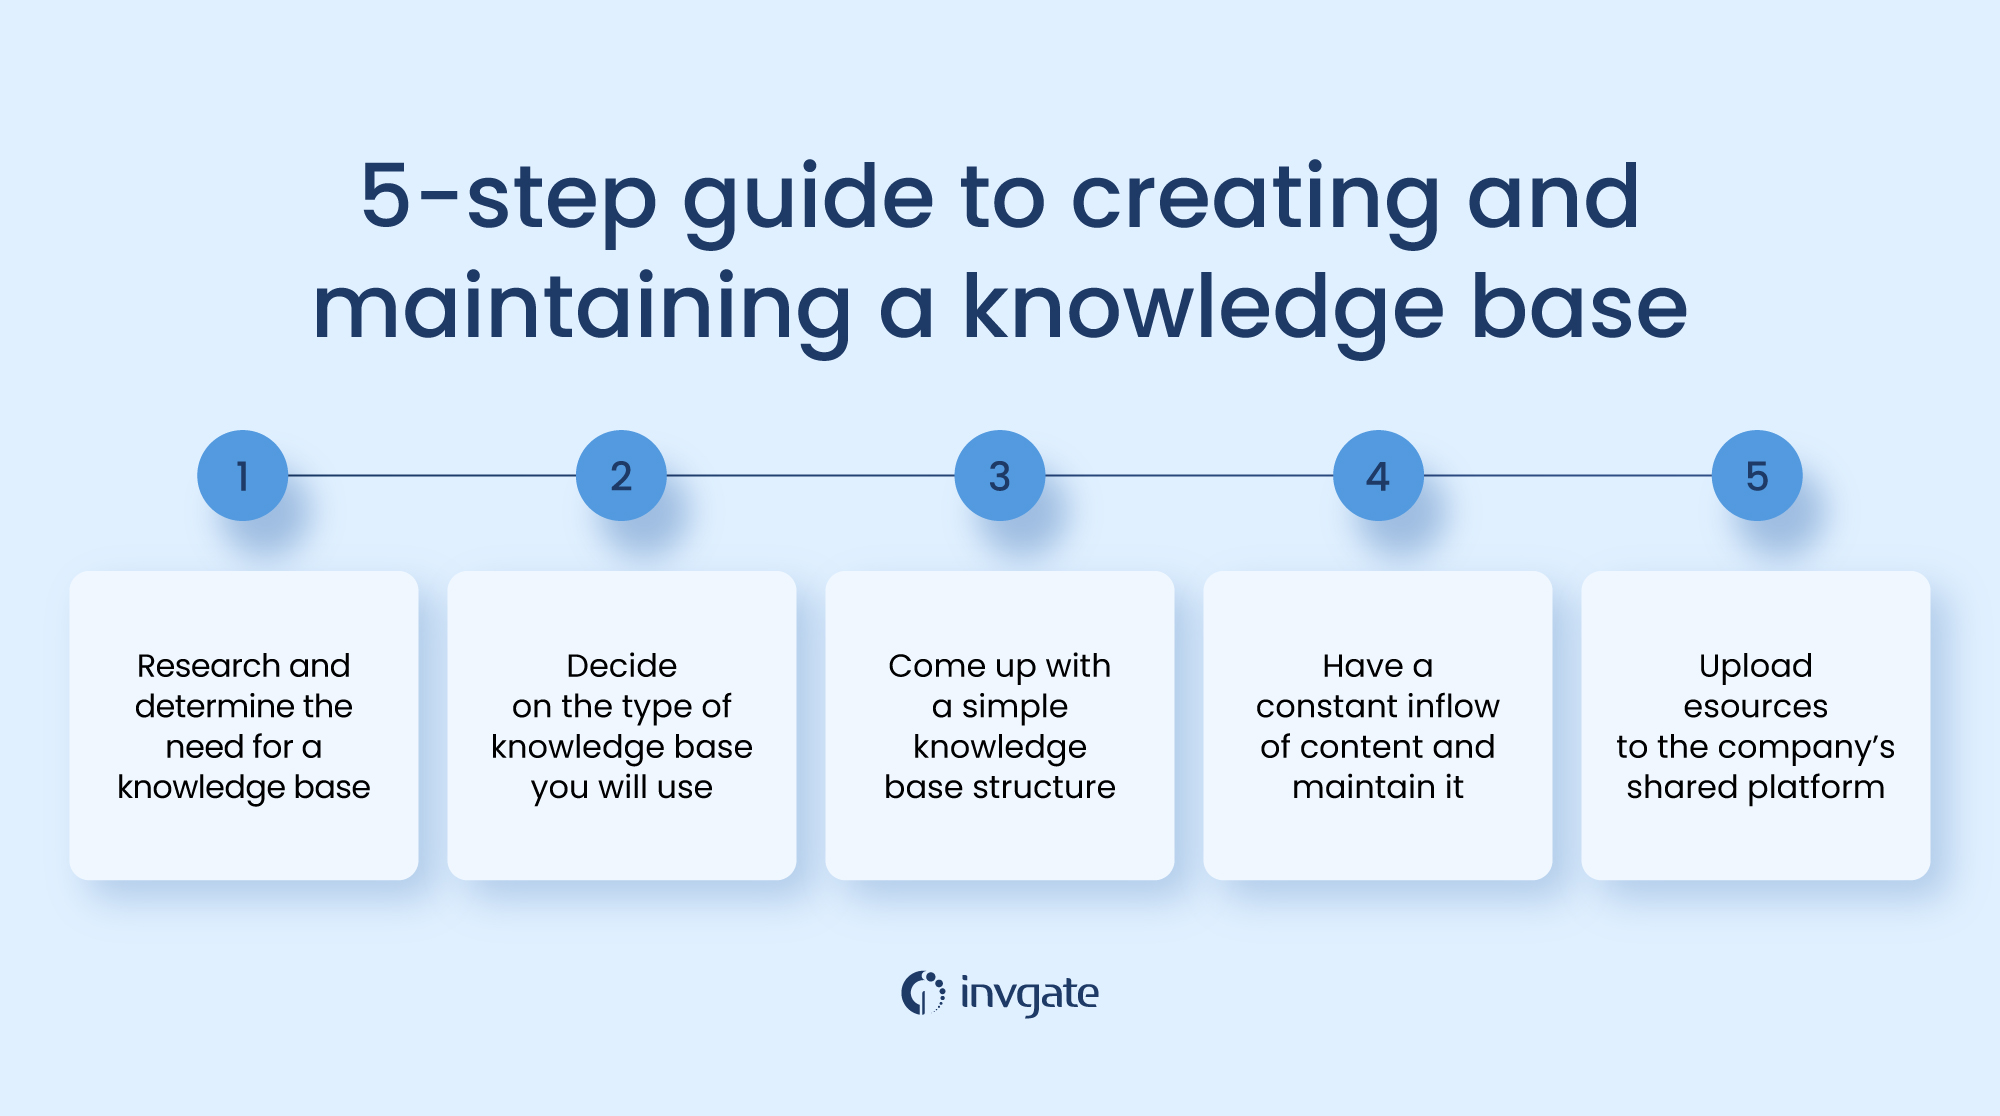 How to create a knowledge base in 5 easy steps.